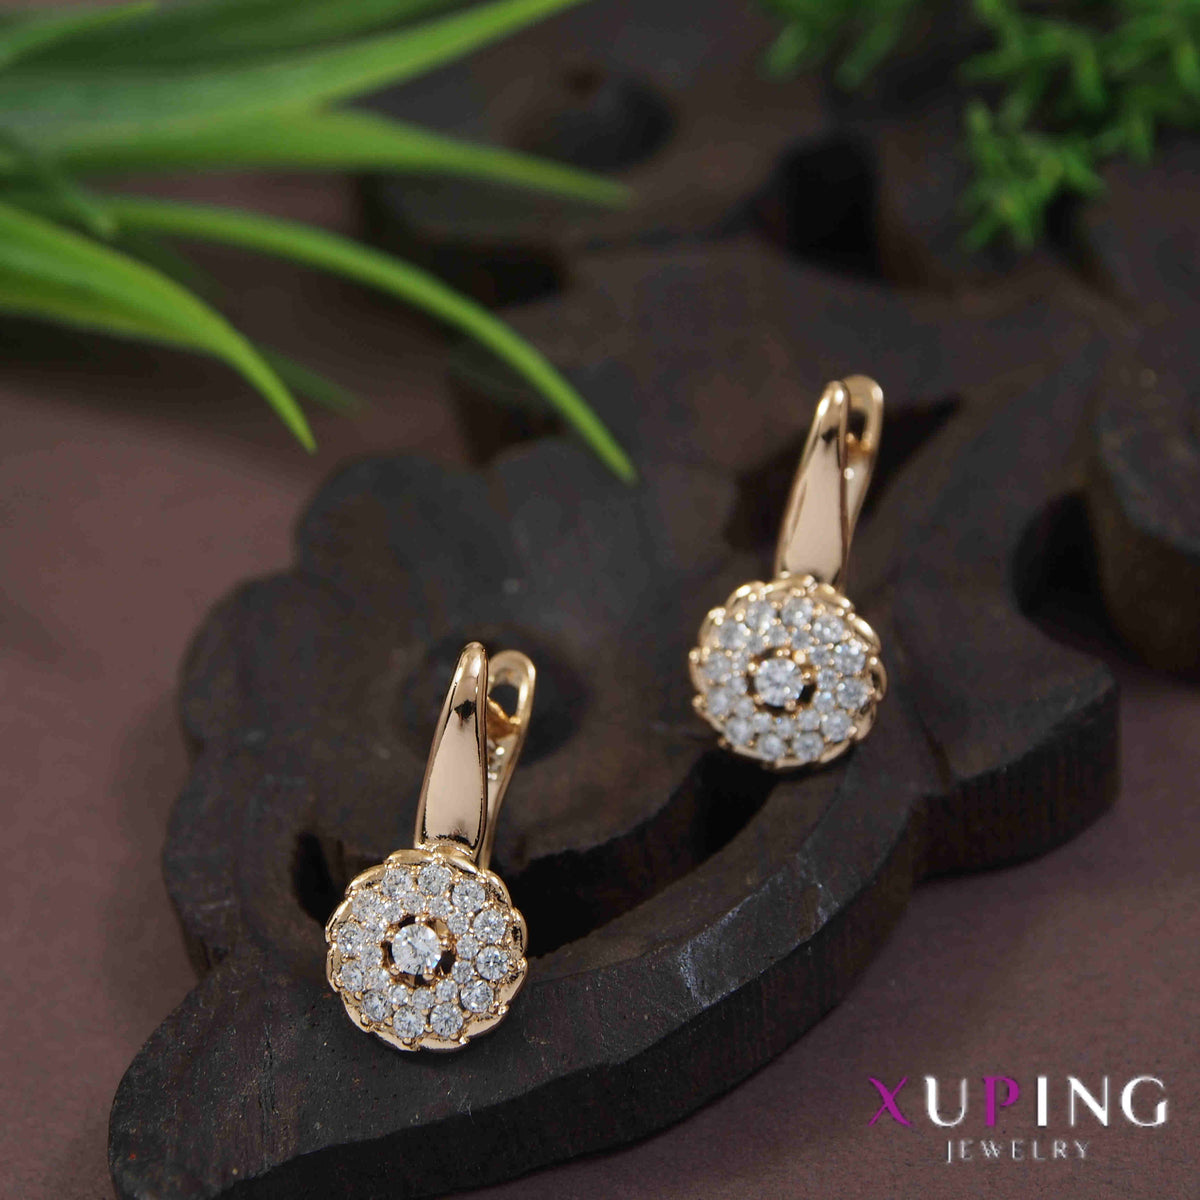 Gold Plated Floral Shaped Cubic Zicronia Xuping Earring- XPNGER 4536